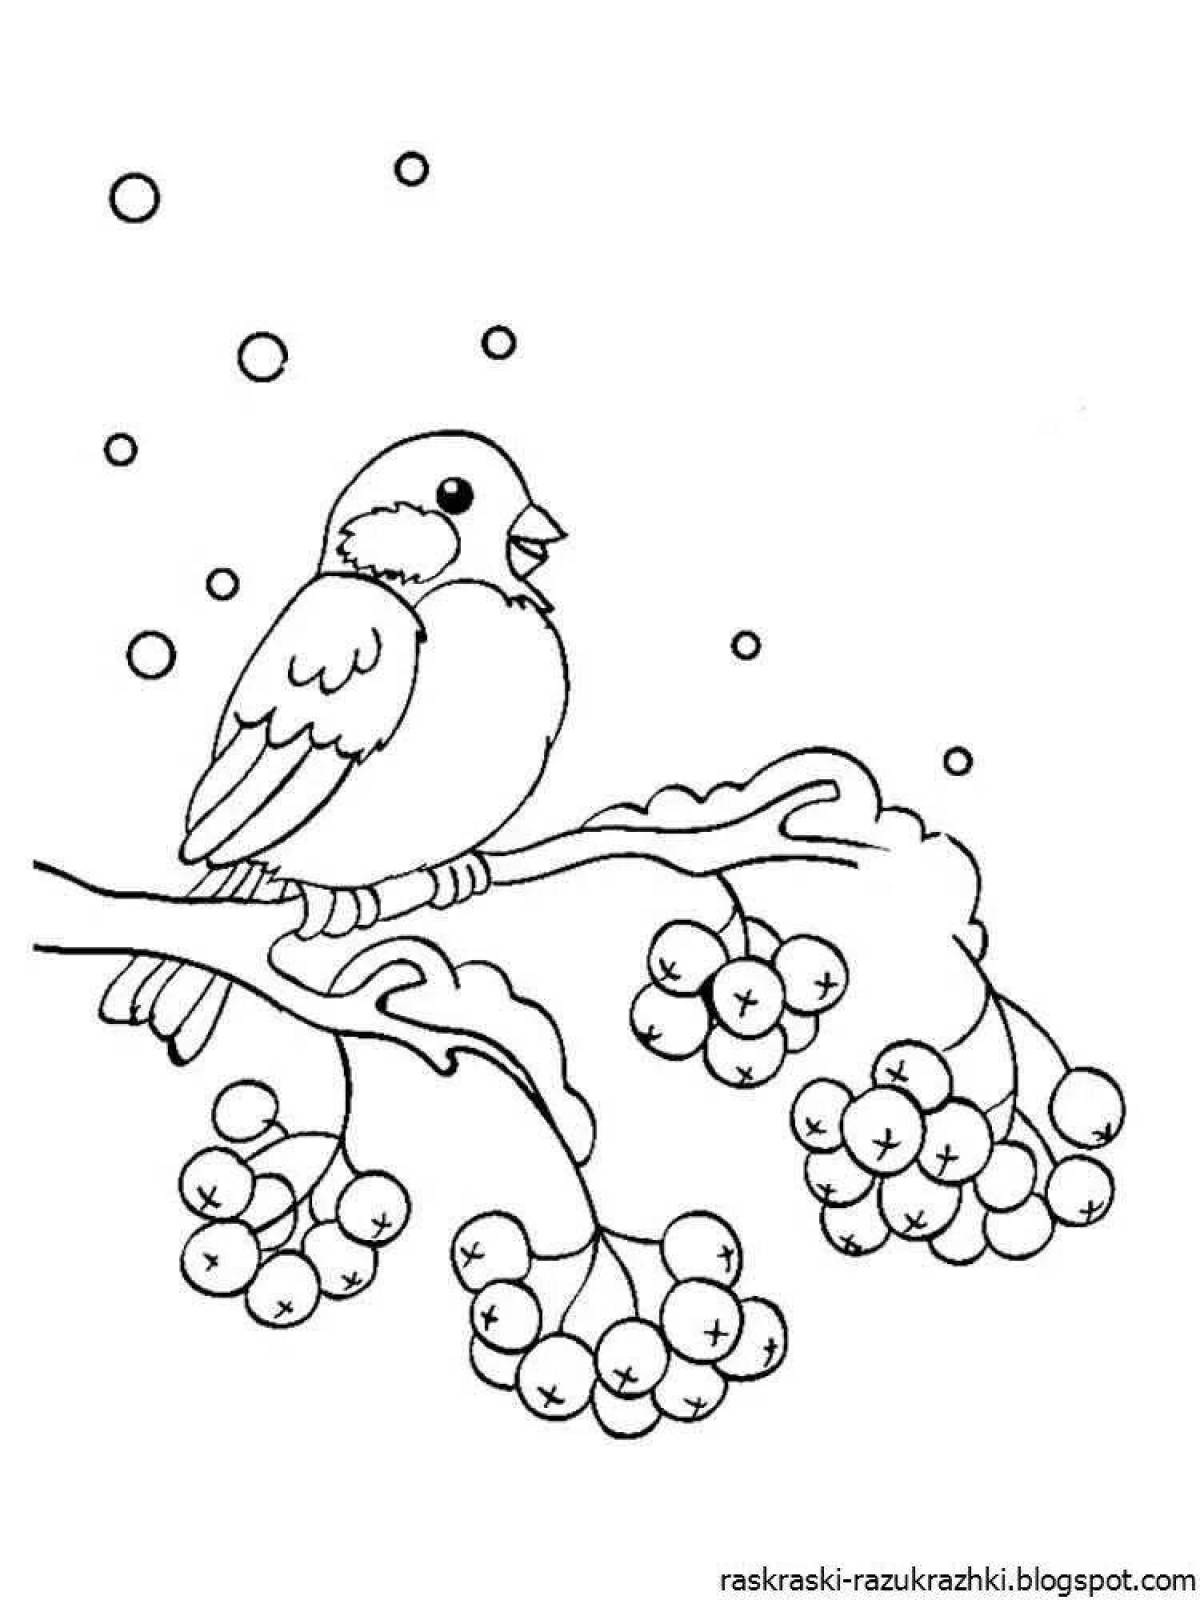 Impressive bullfinch coloring book for kids 6-7 years old